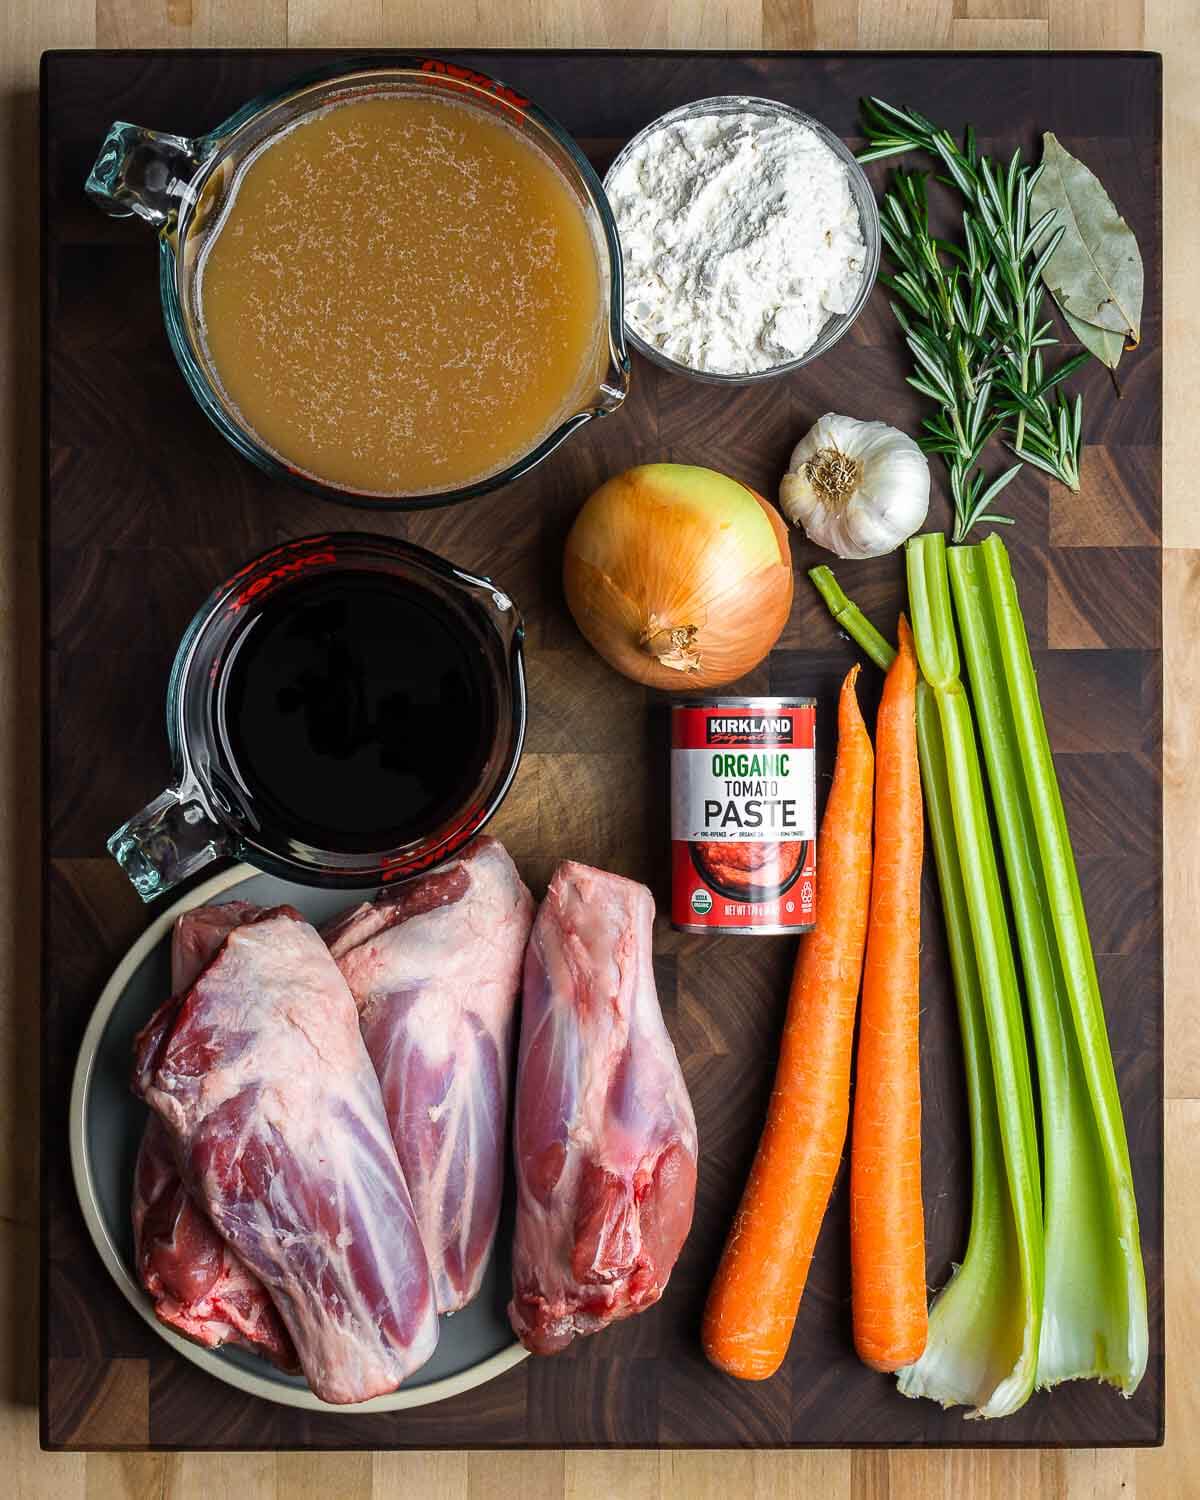 Ingredients shown: beef stock, flour, herbs, onion, garlic, red wine, tomato paste, carrots, celery, and lamb shanks.